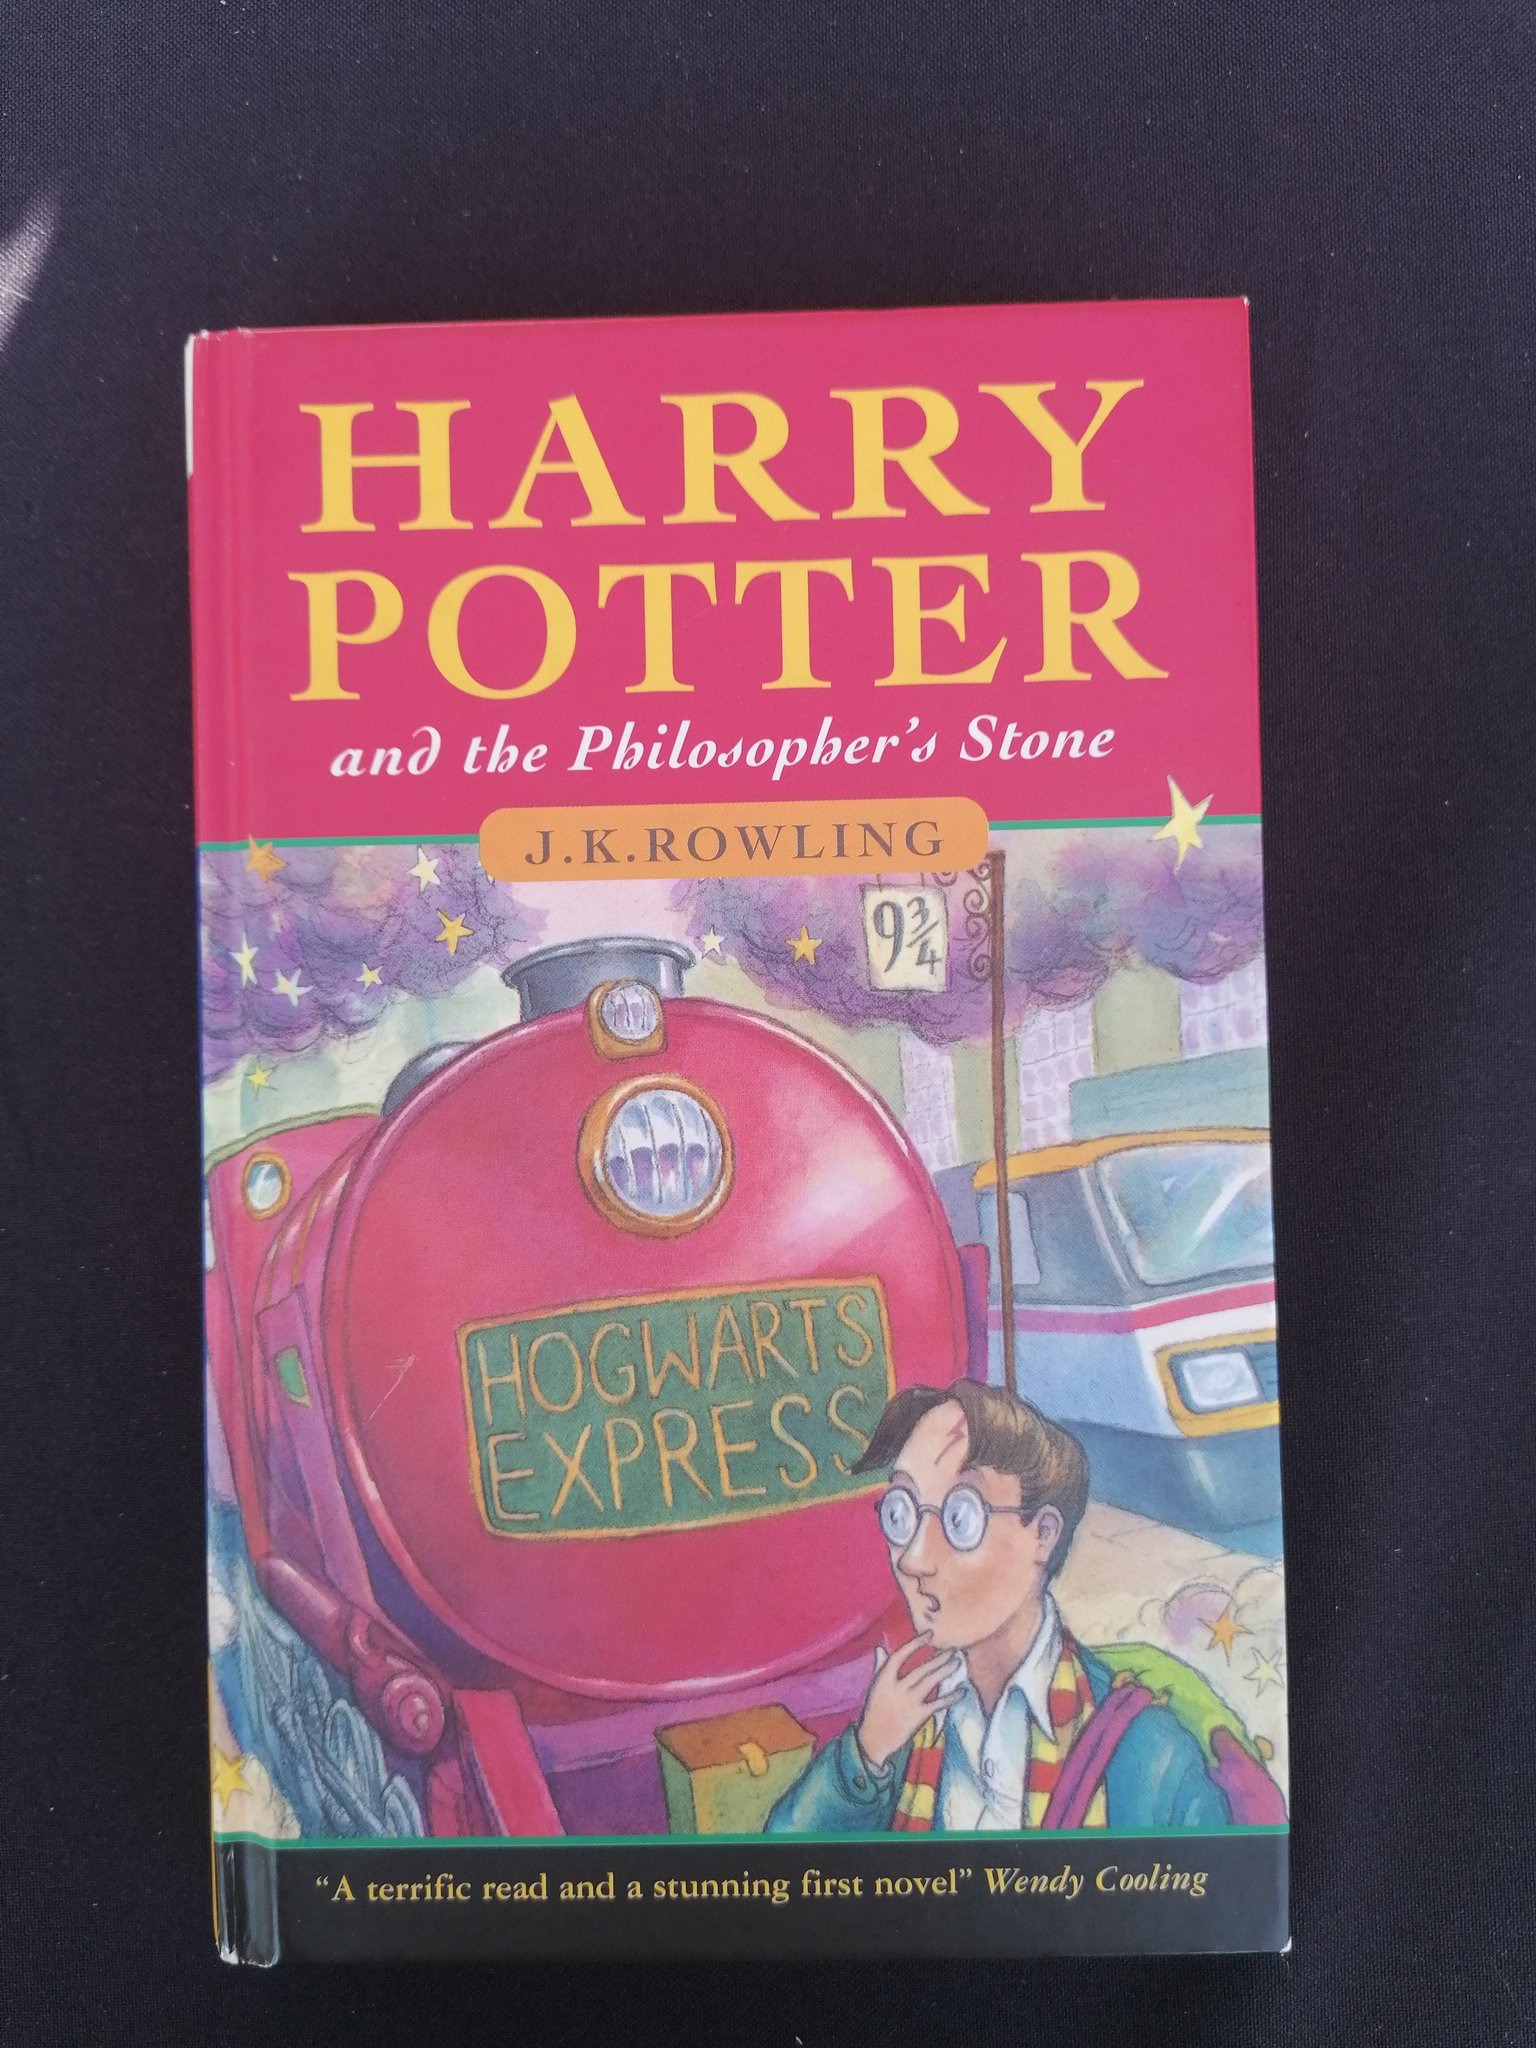 Hardback First Edition of Harry Potter and the Philosopher's Stone Gets Sold for Around 120,000